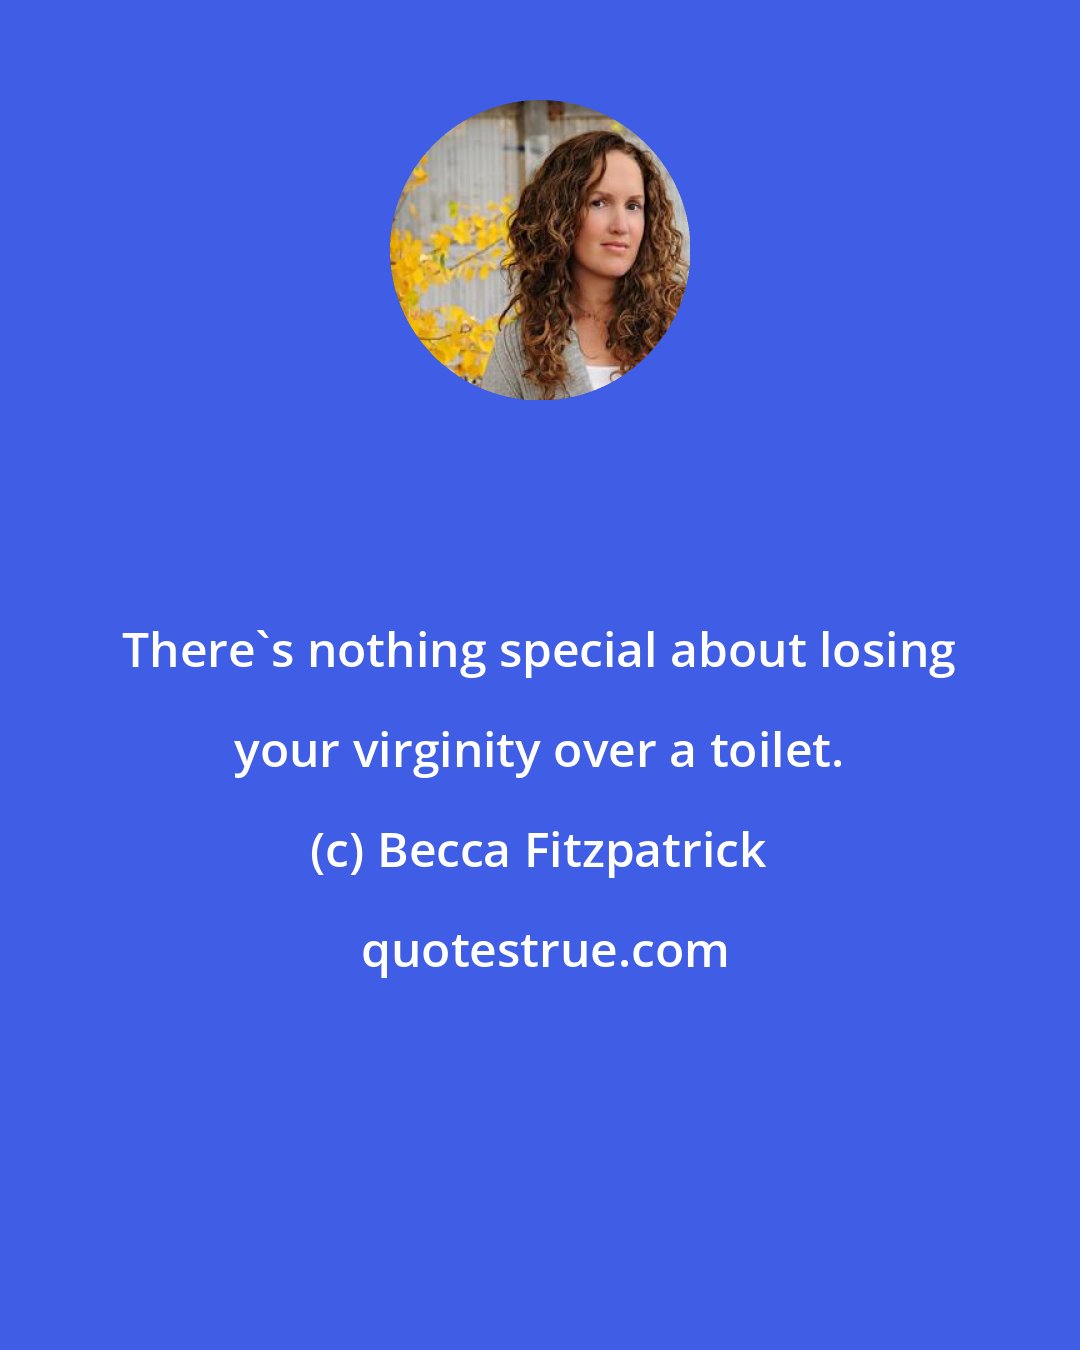 Becca Fitzpatrick: There's nothing special about losing your virginity over a toilet.